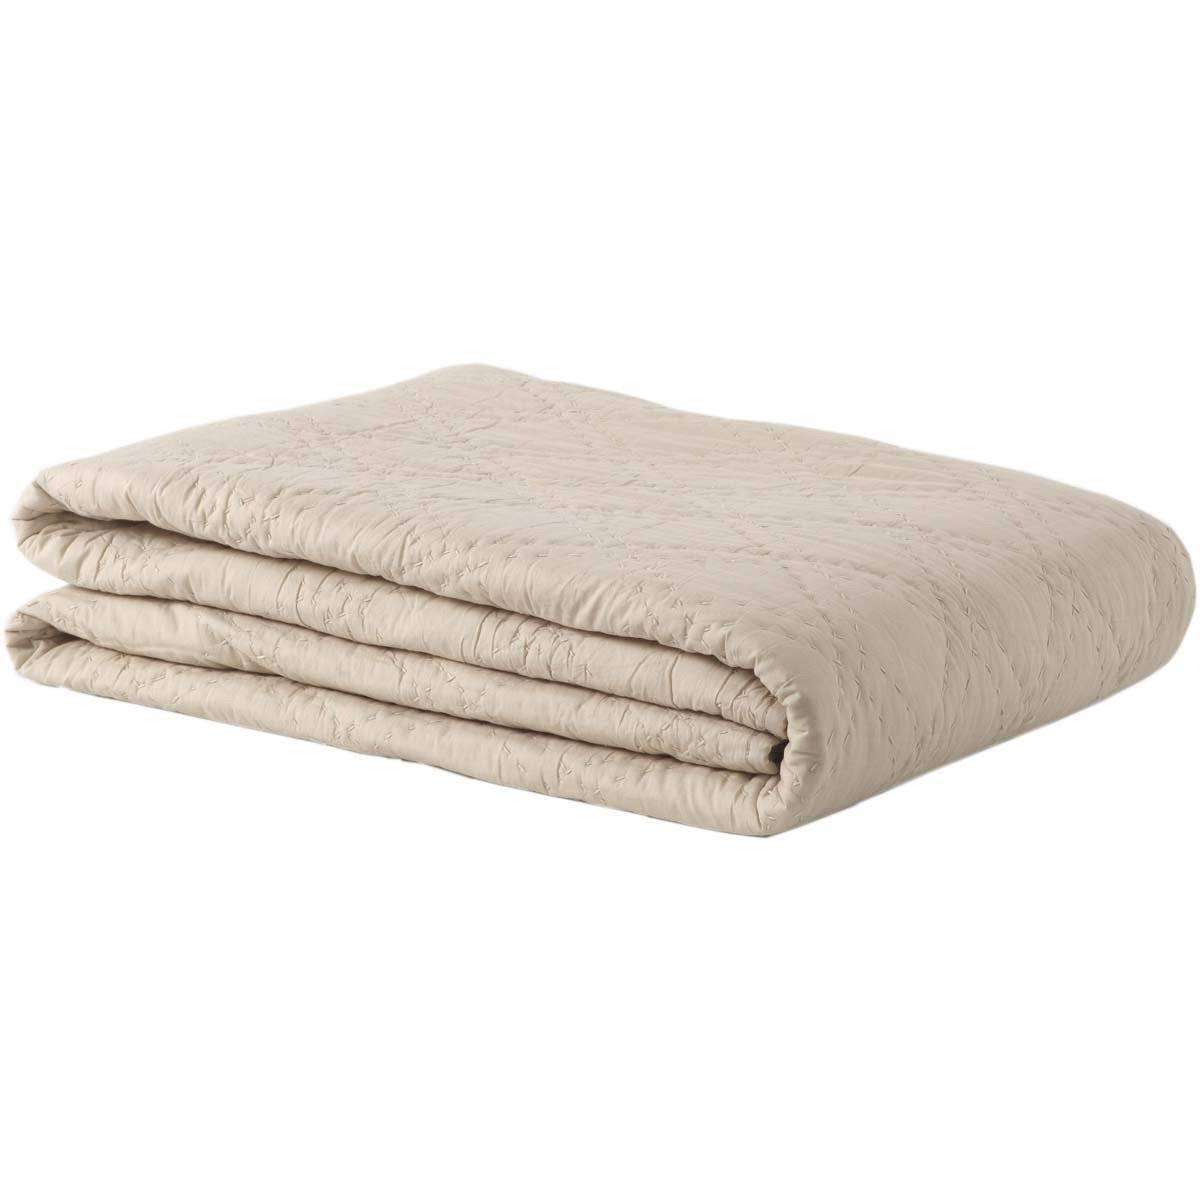 Casey Taupe King/Queen Quilt VHC Brands online